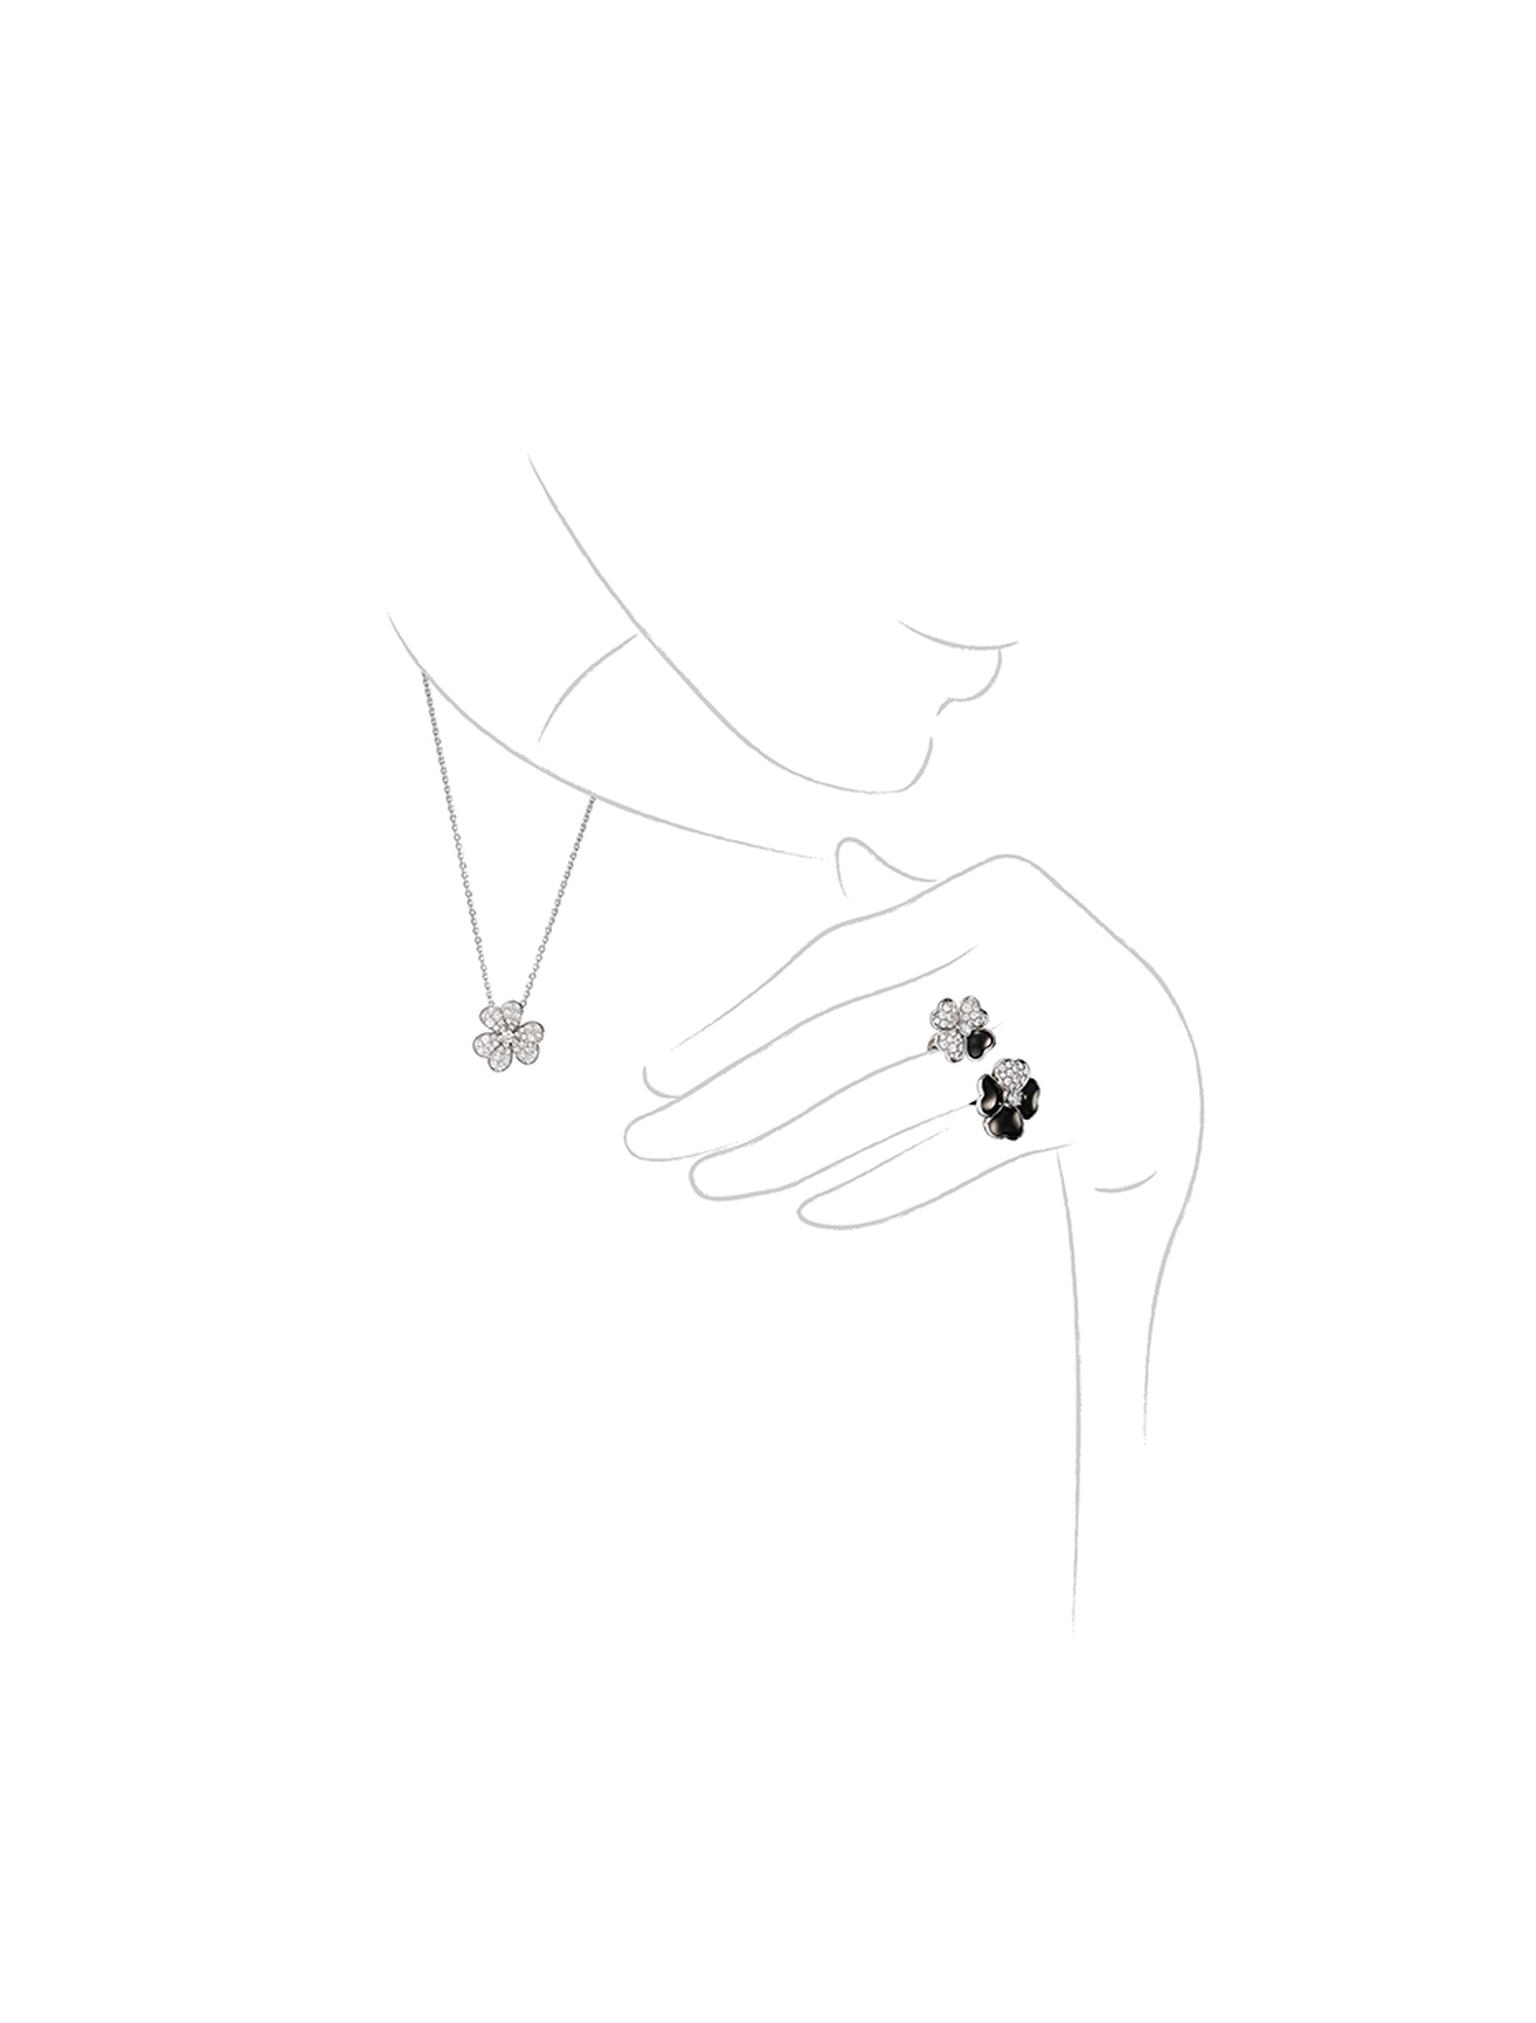 Van Cleef & Arpels Cosmos Between the Finger onyx and diamond ring and Cosmos diamond necklace.